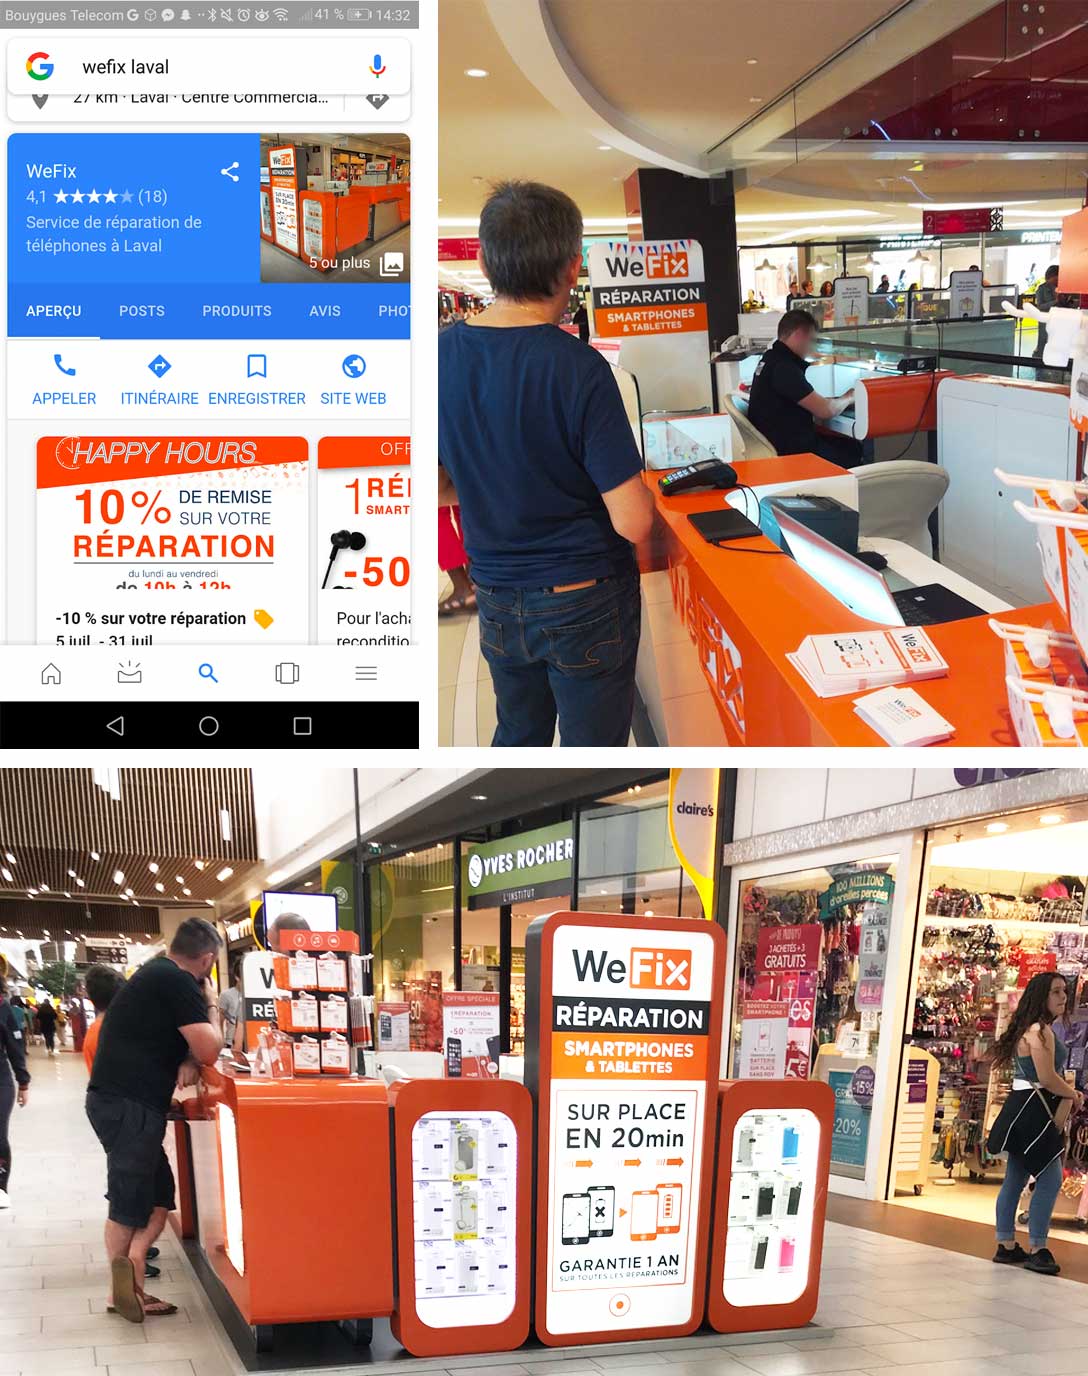 Customer case: our response to Fnac Darty's problem to evaluate the omnichannel experience provided by WeFix.